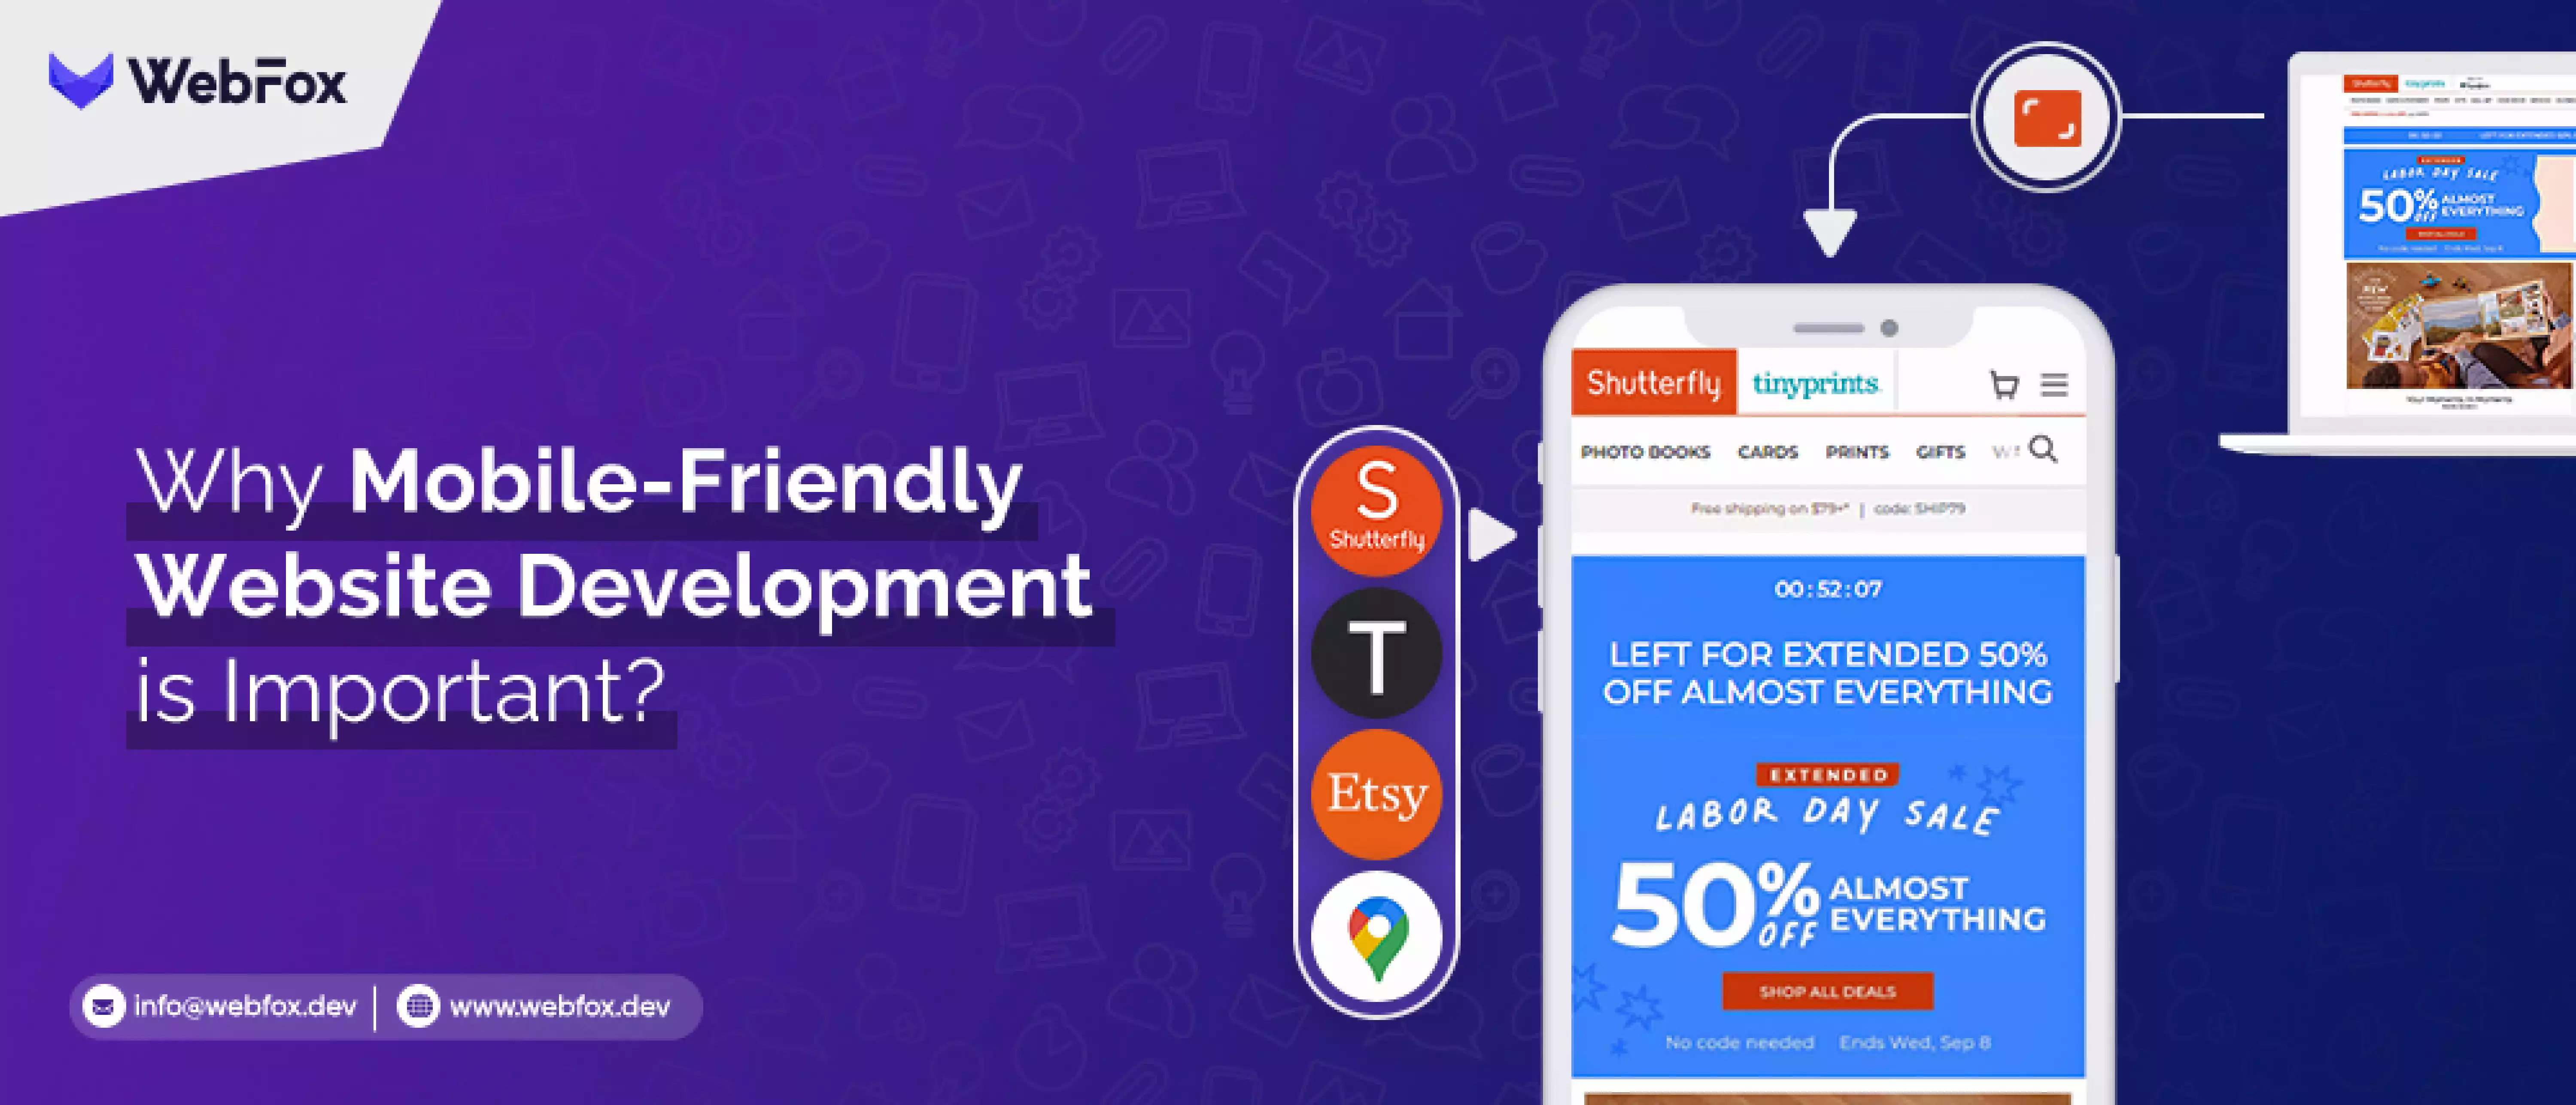 Why Mobile-Friendly Website Development is Important